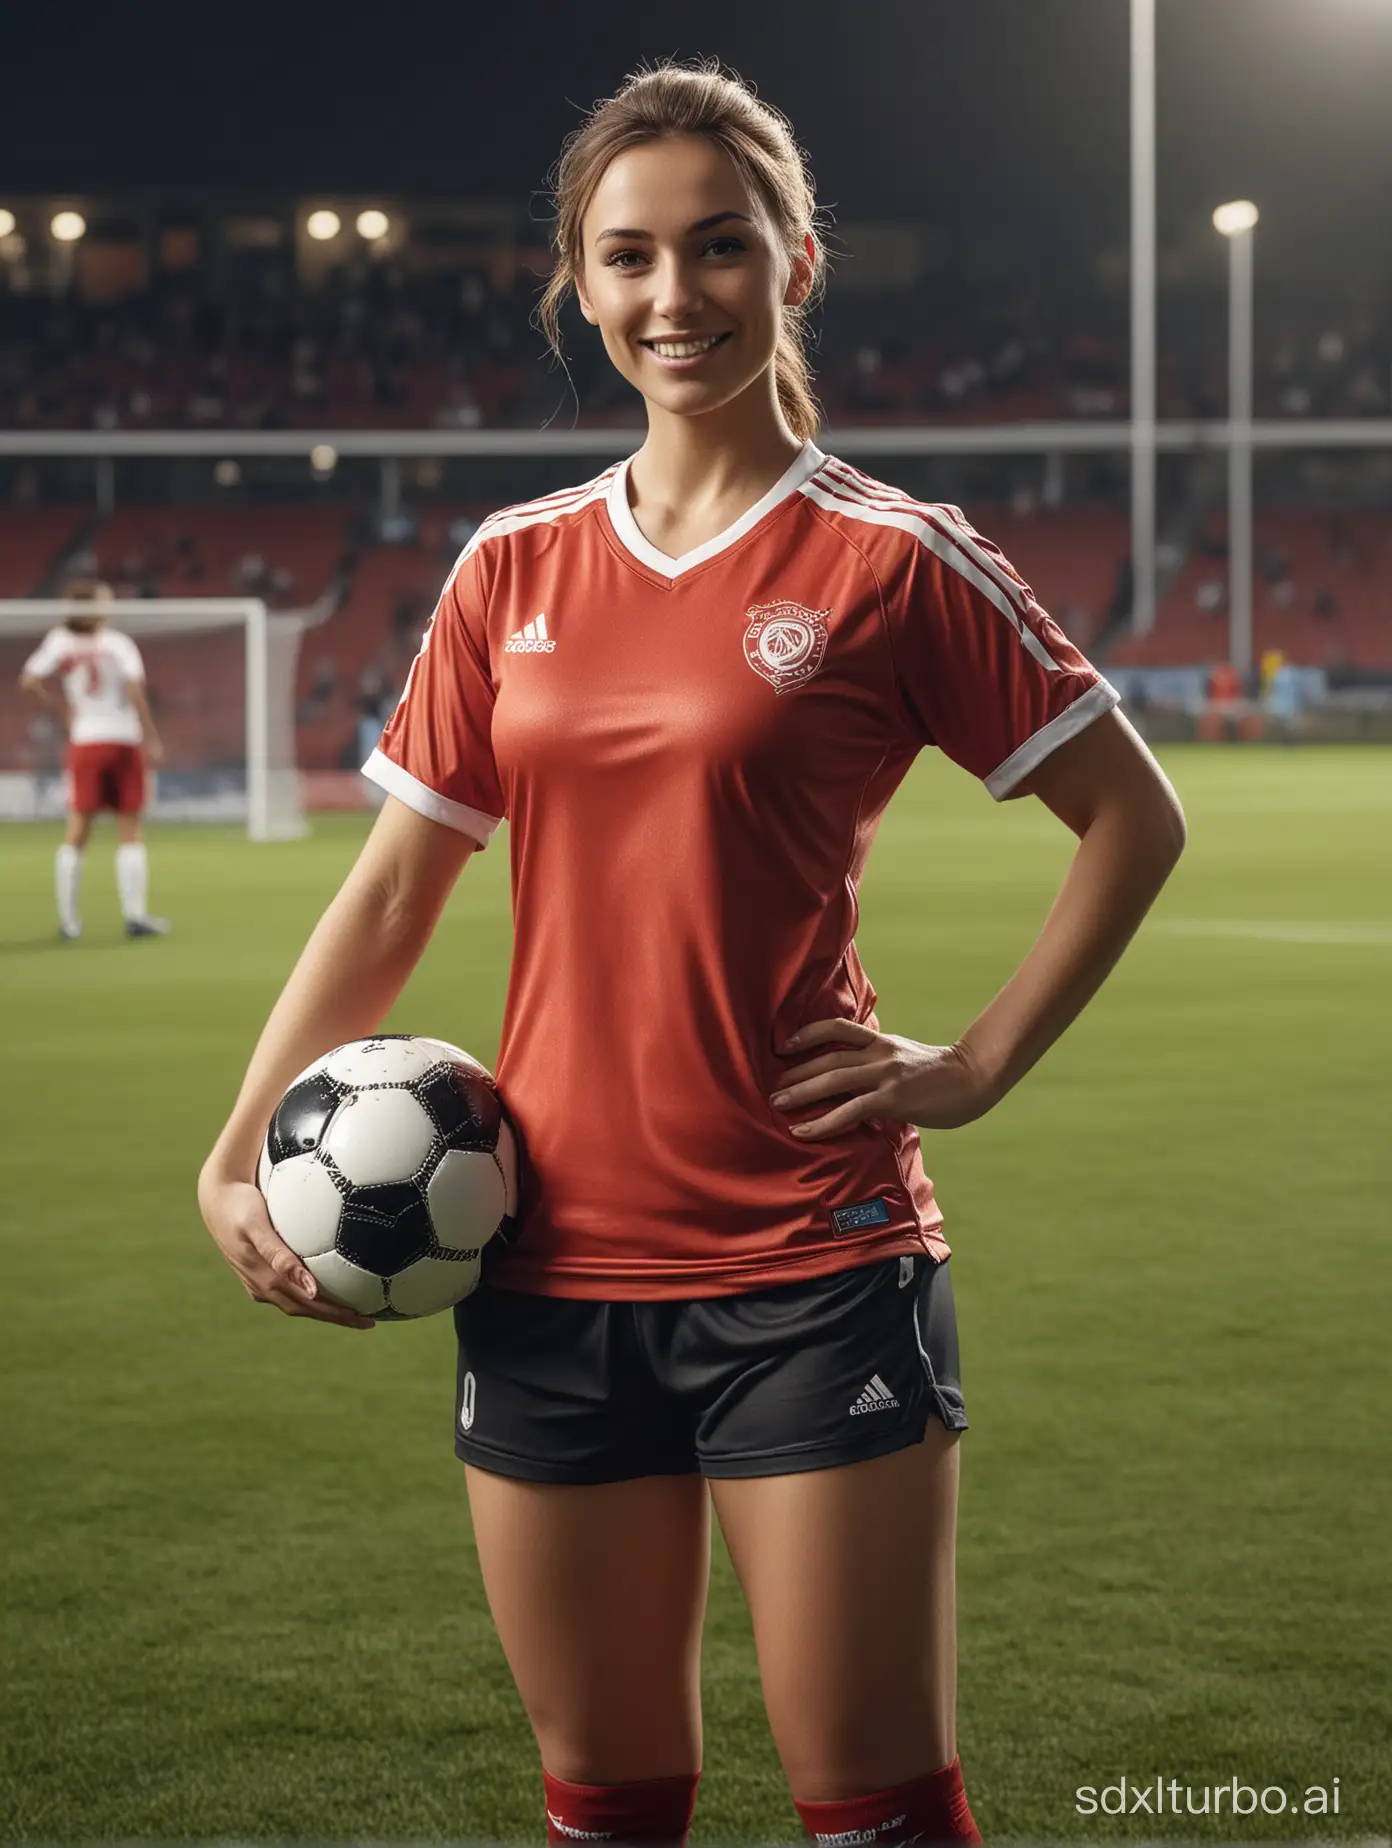 Smiling-Soccer-Player-Woman-on-Football-Pitch-FullLength-Portrait